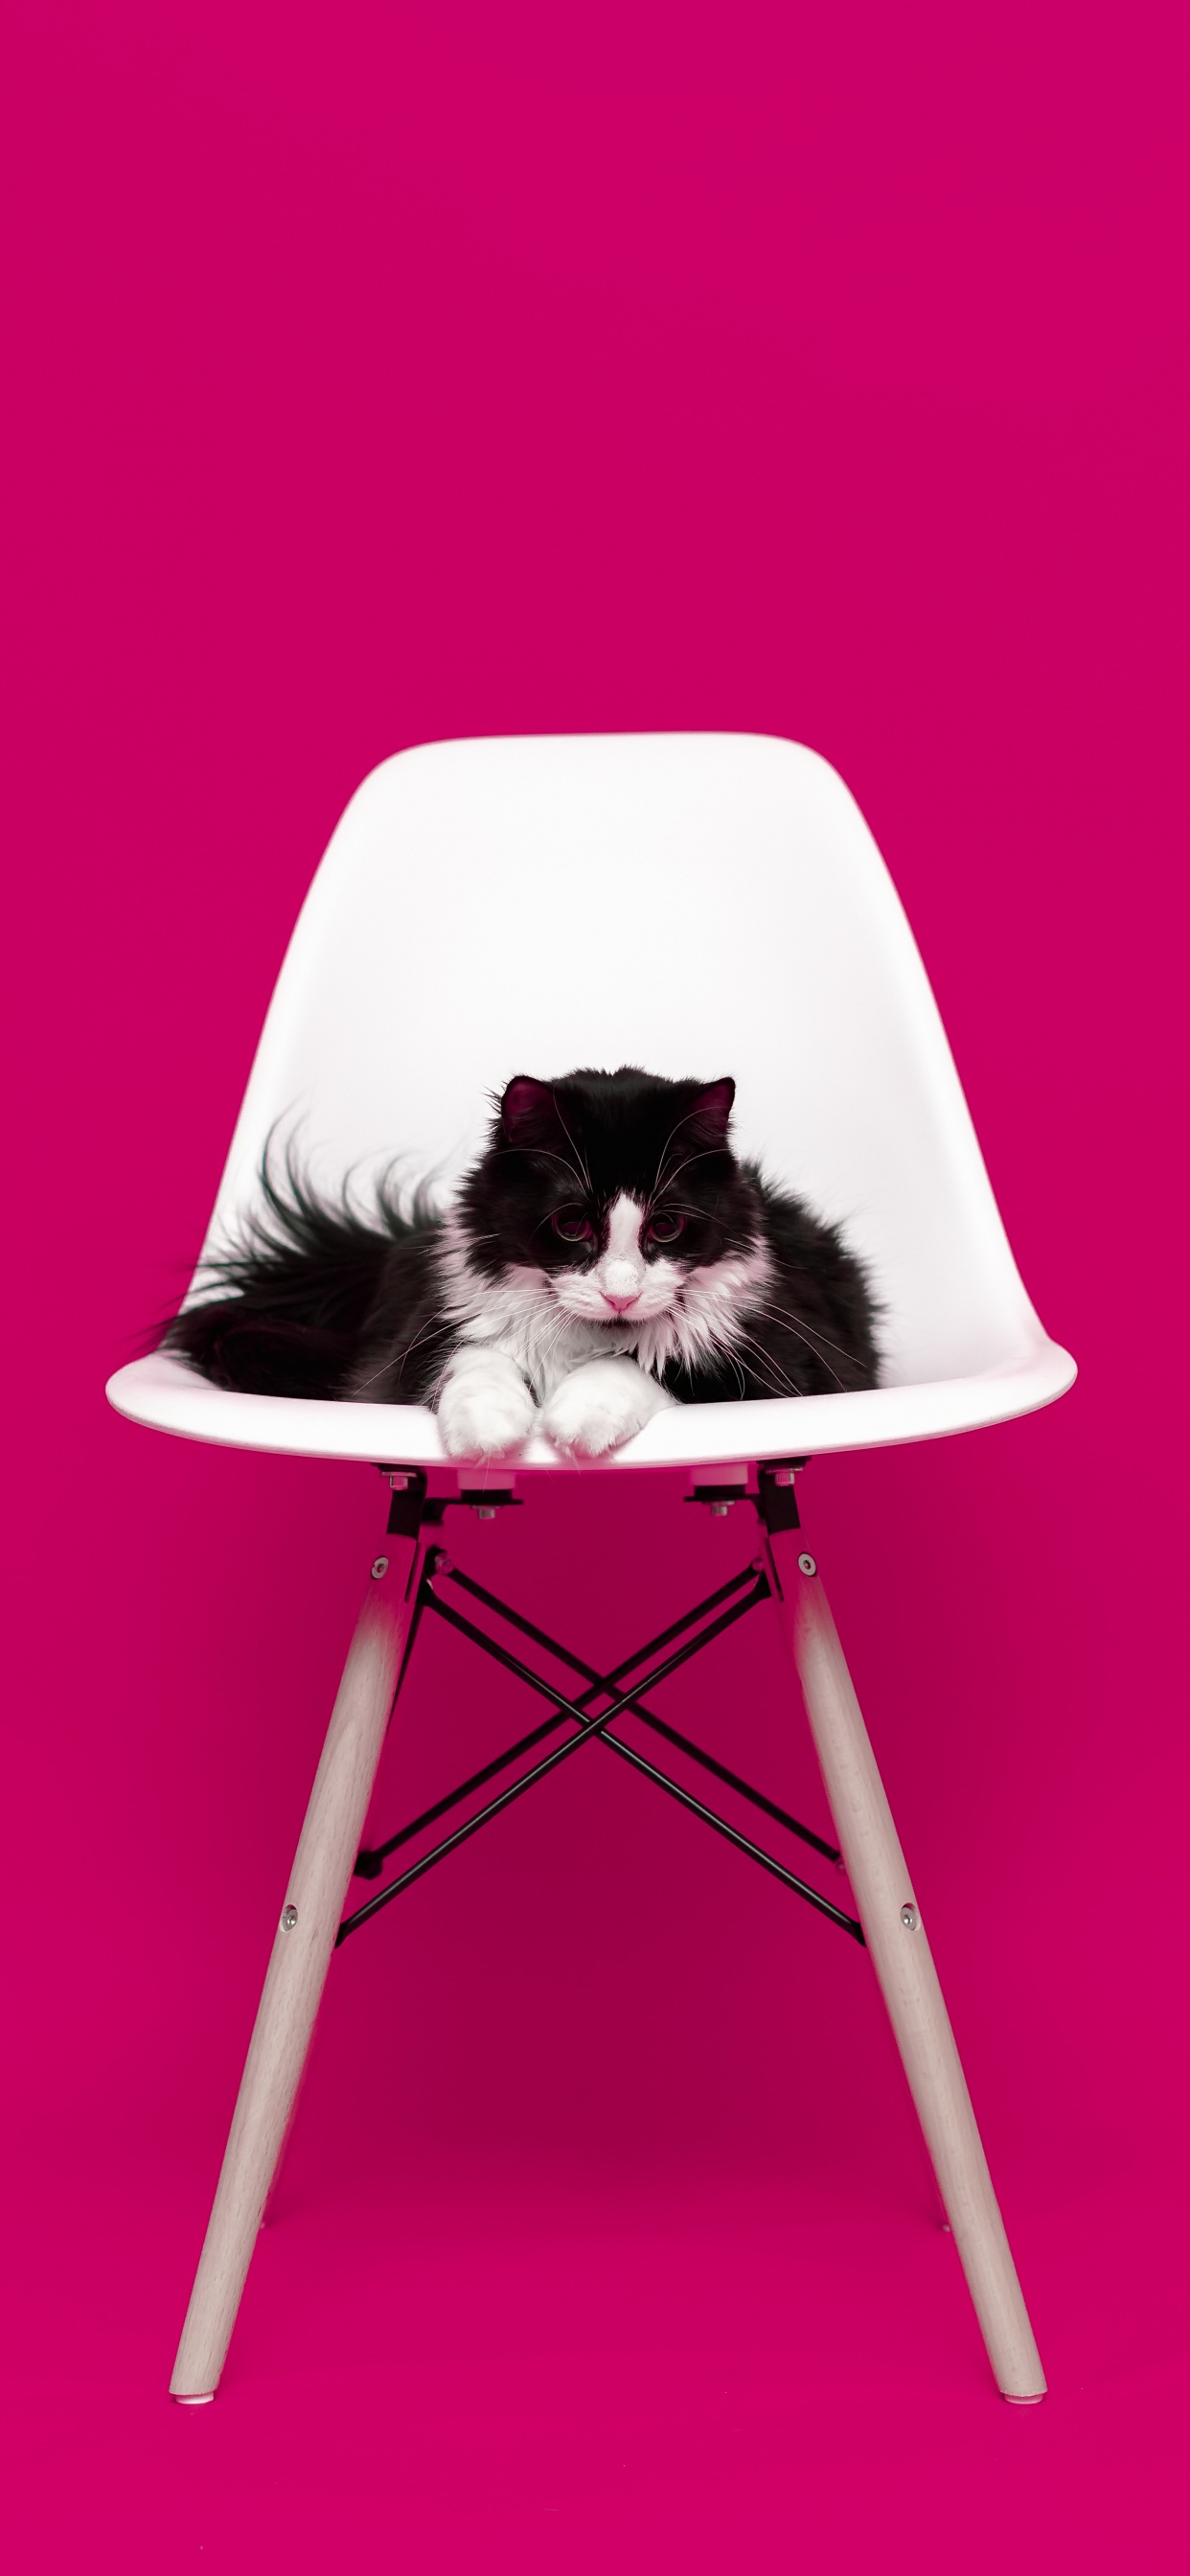 Black and White Cat on White Chair. Wallpaper in 1242x2688 Resolution